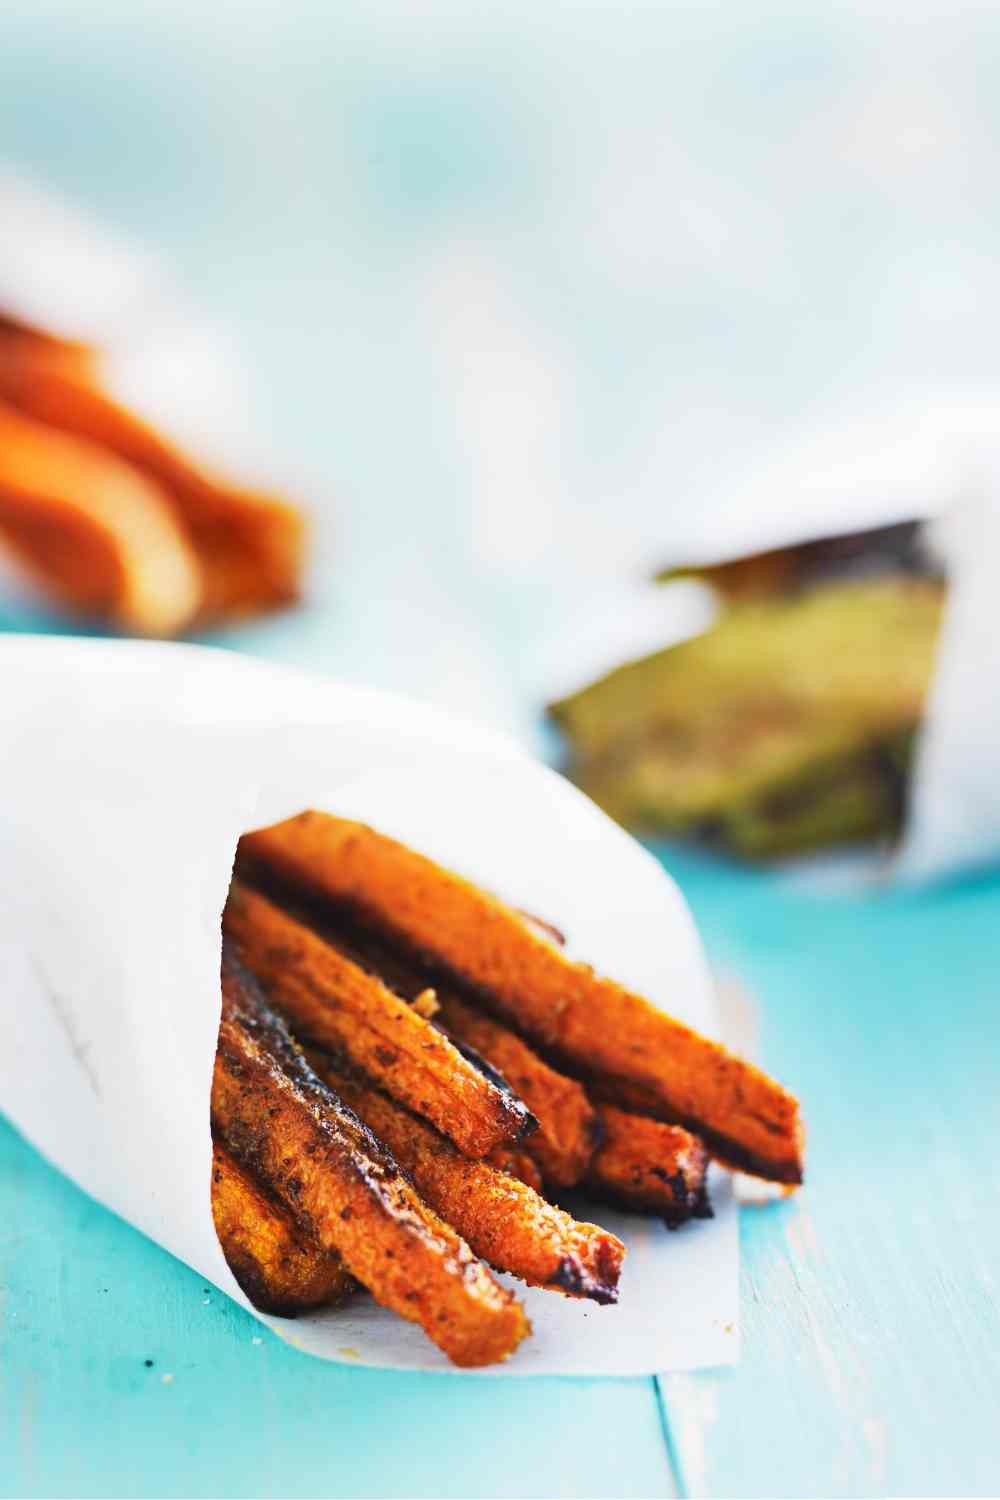 Carrot fries with curry dips